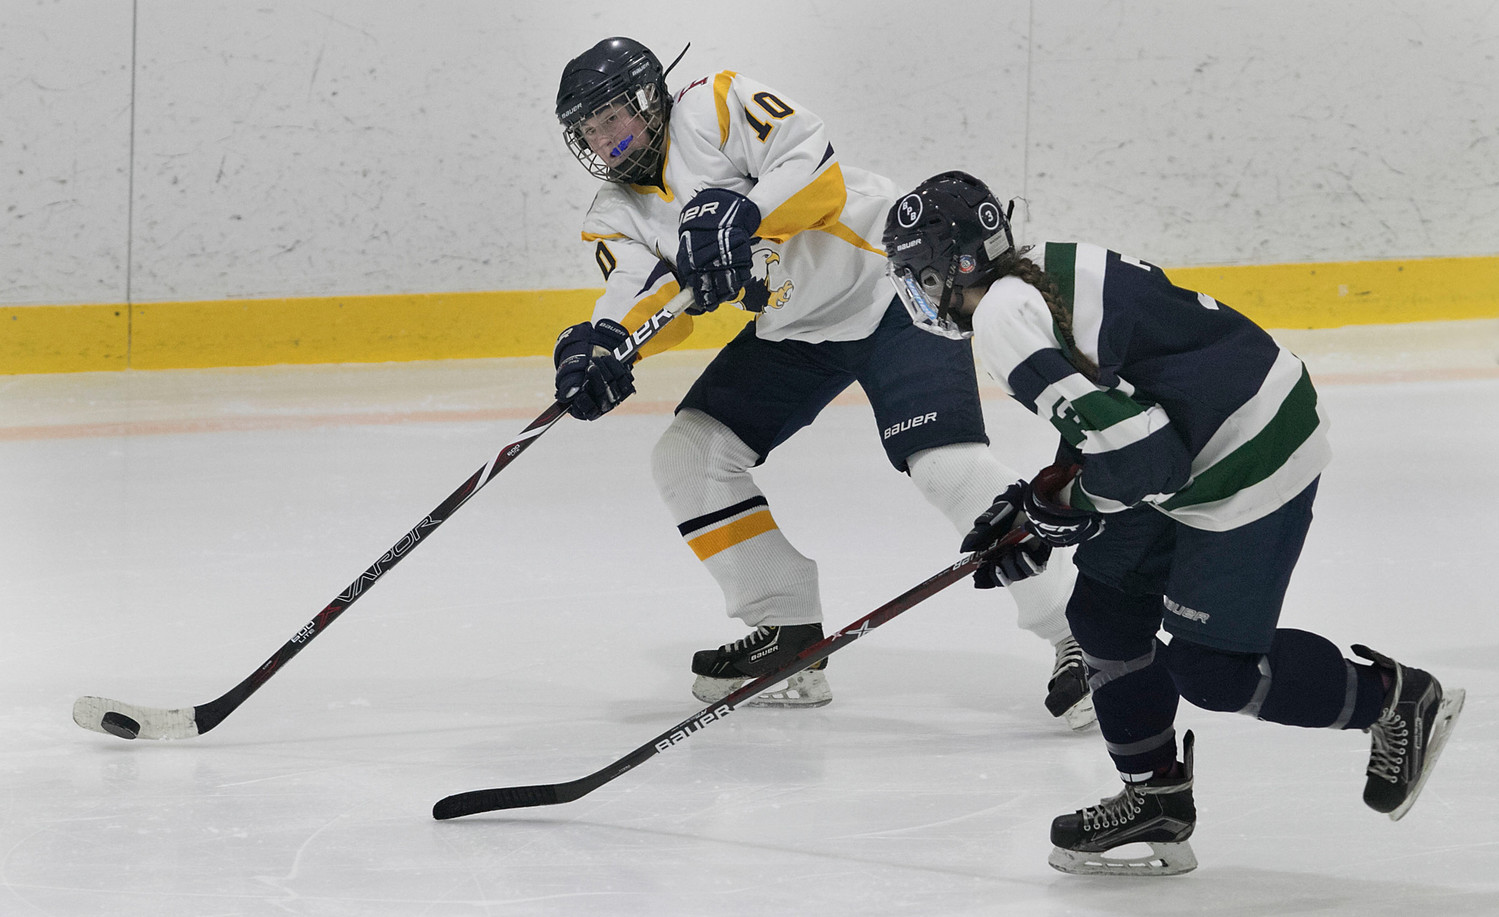 East Bay defenseman Madelyn Cox skates the puck into the offensive zone. She scored a goal and assisted on another during the game.